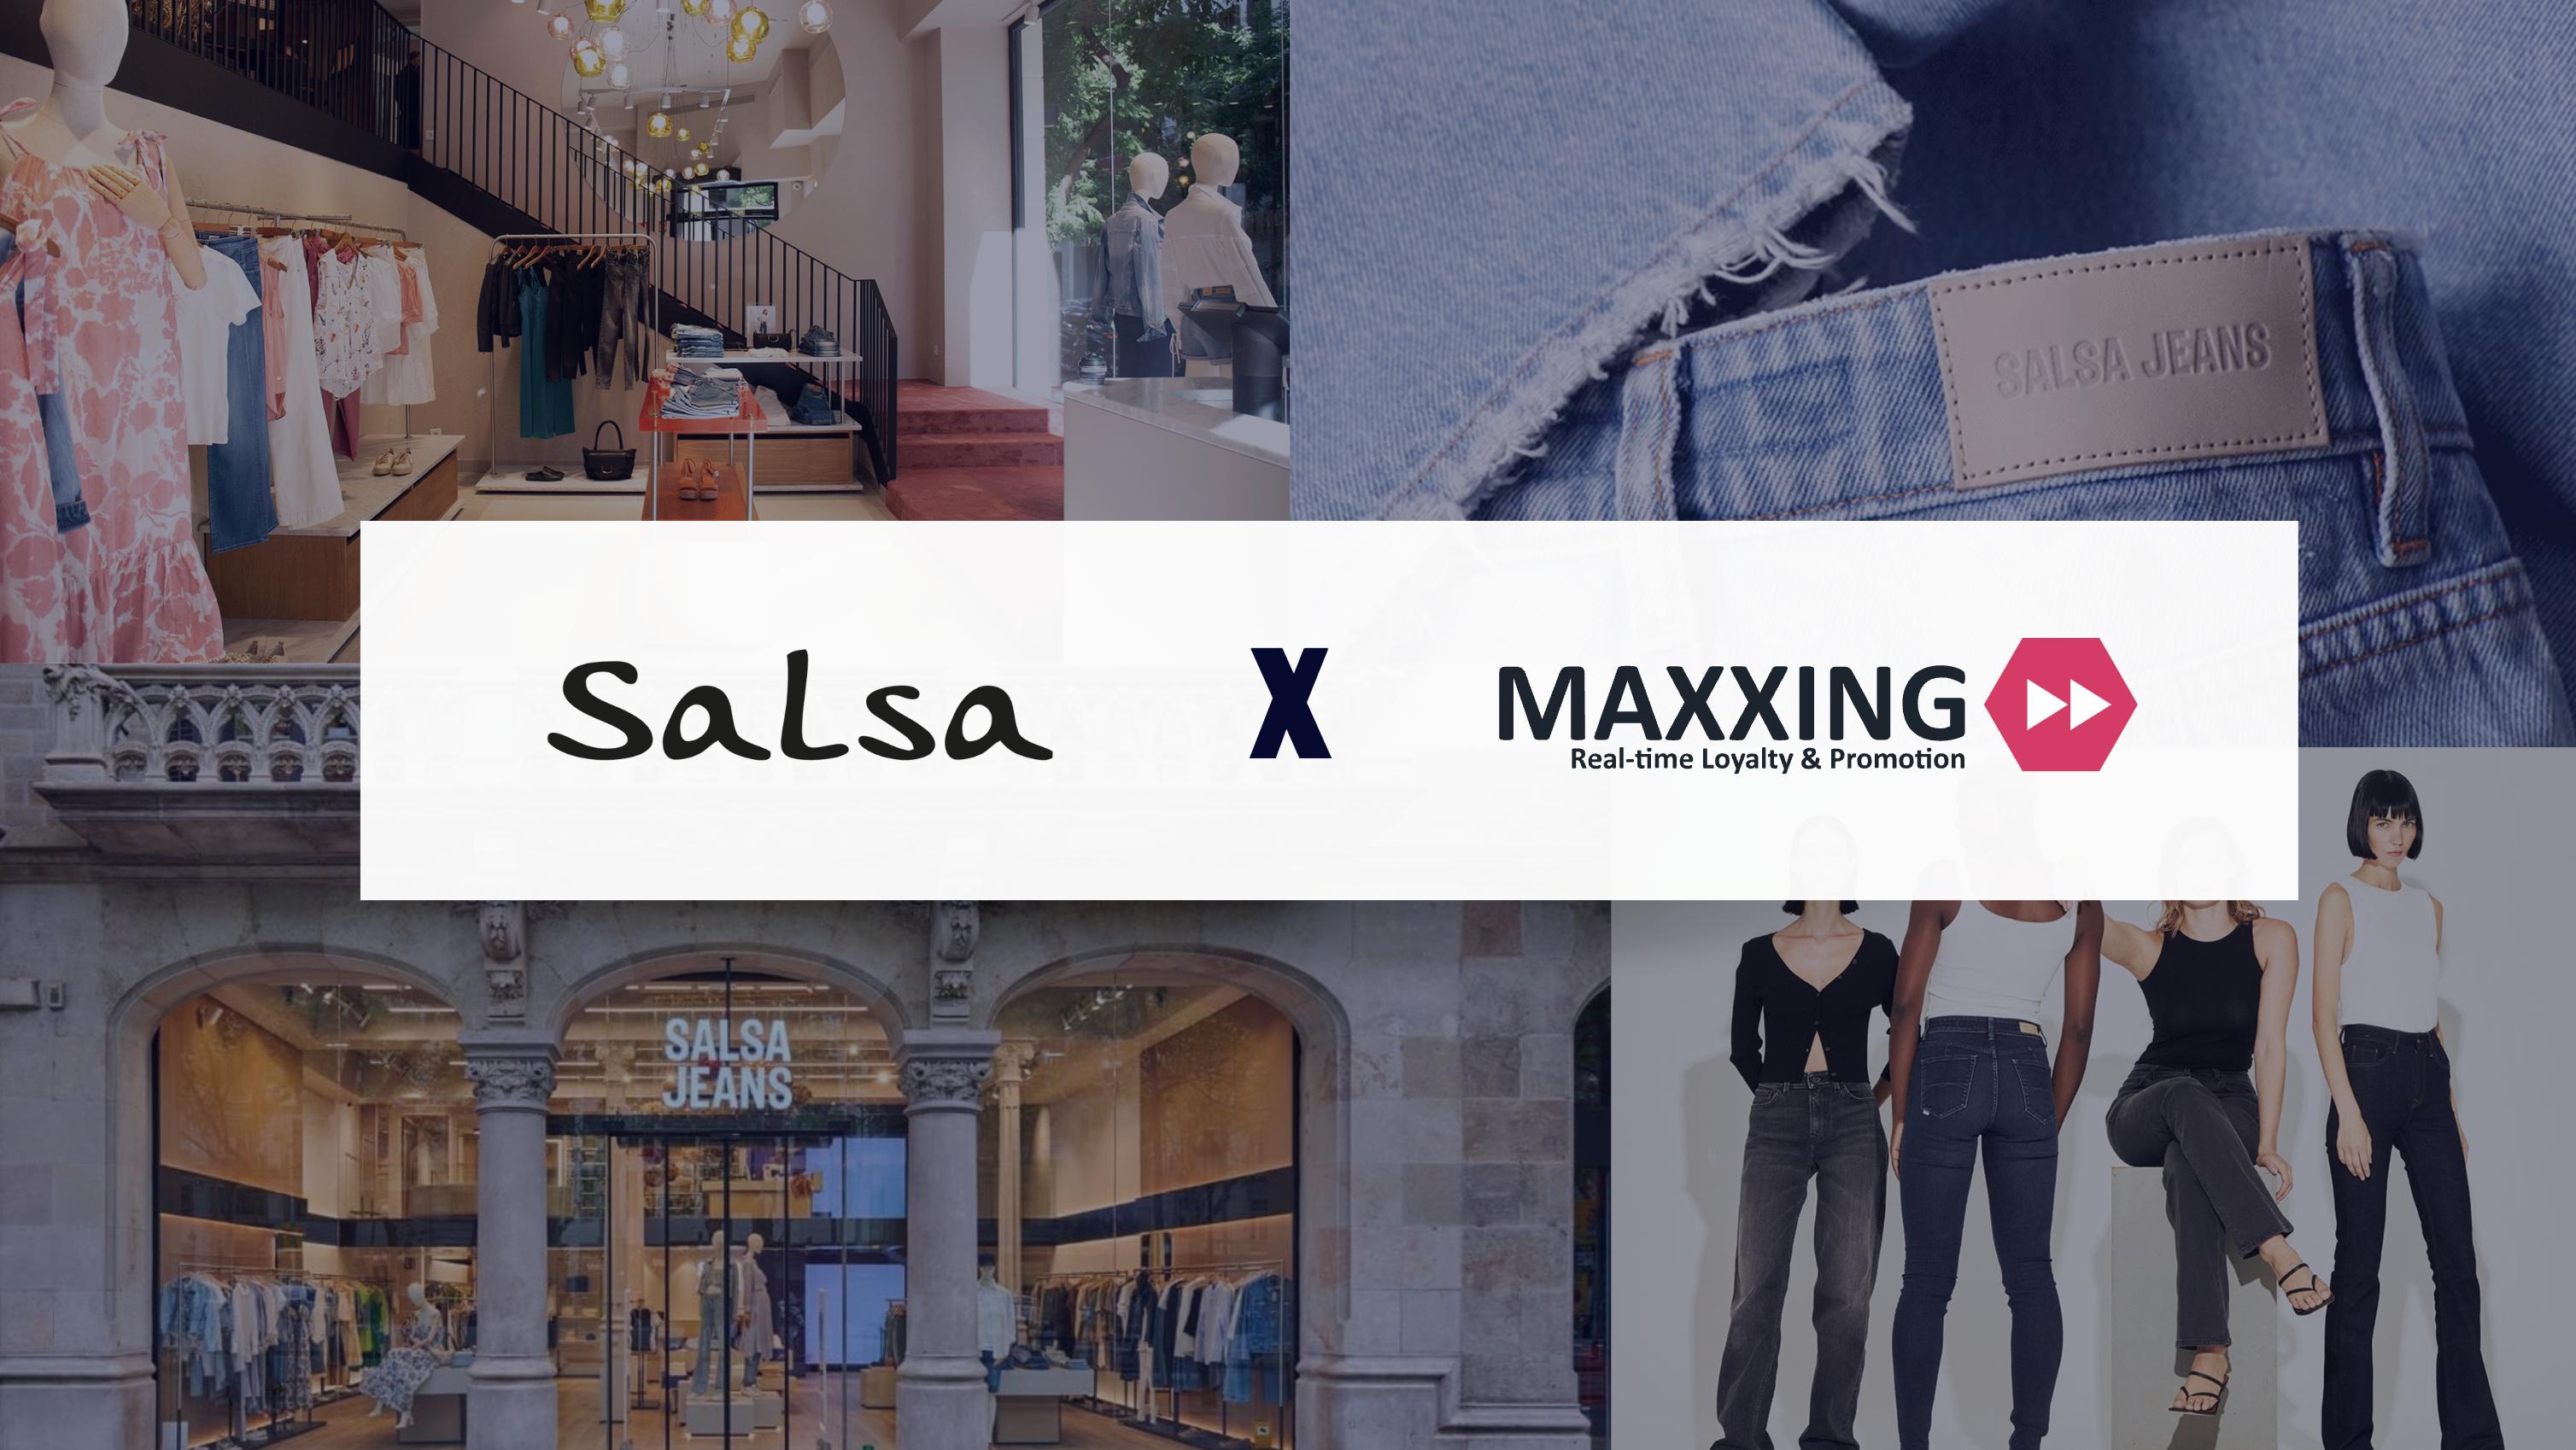 Why did Salsa choose Maxxing?